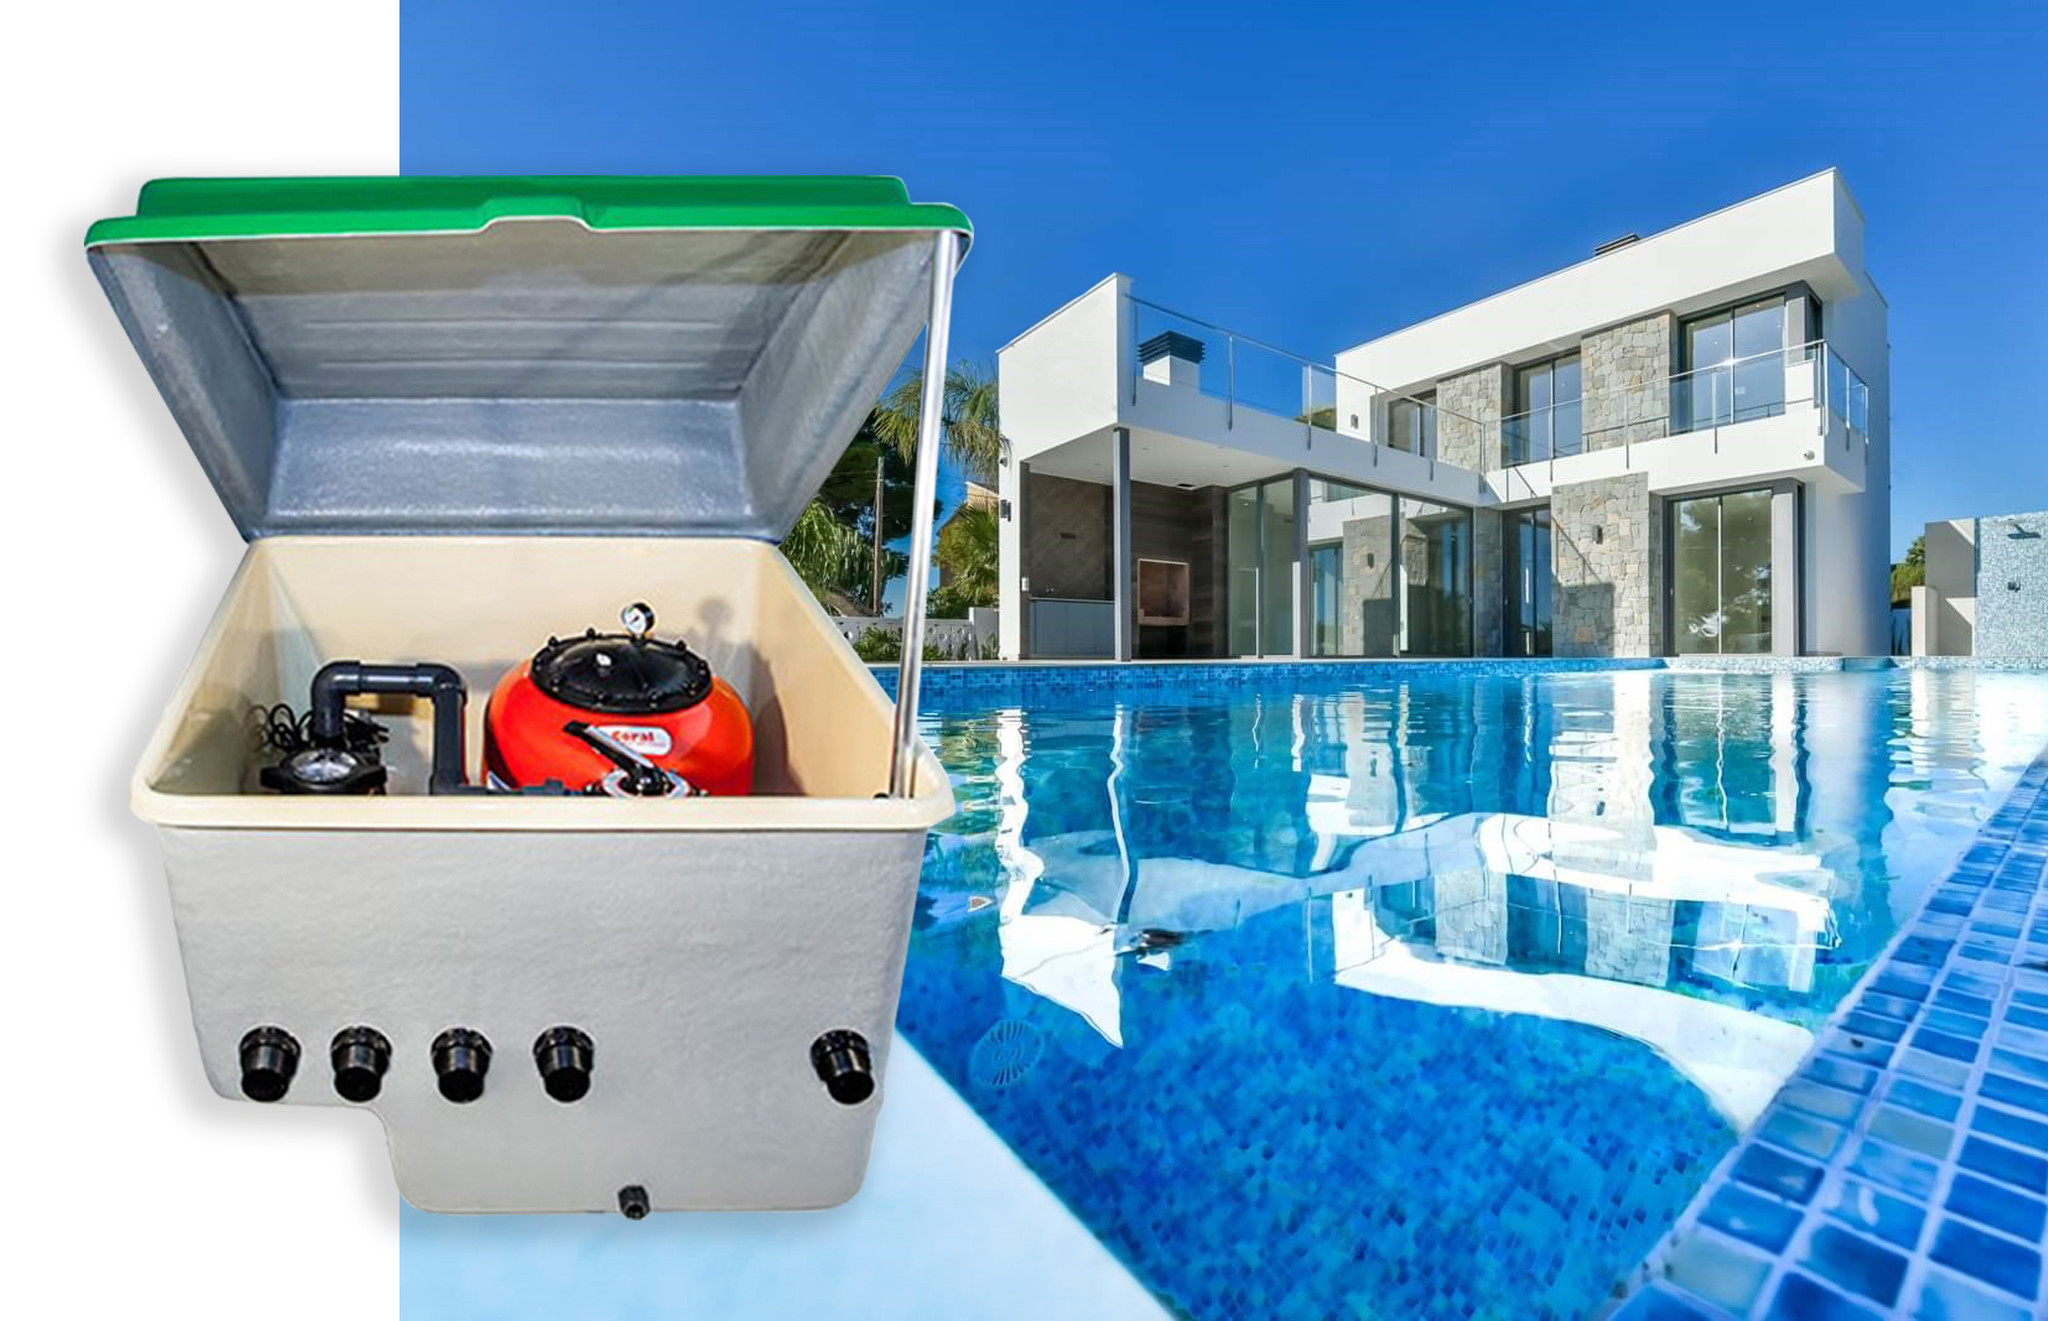 Swimming pool filtration